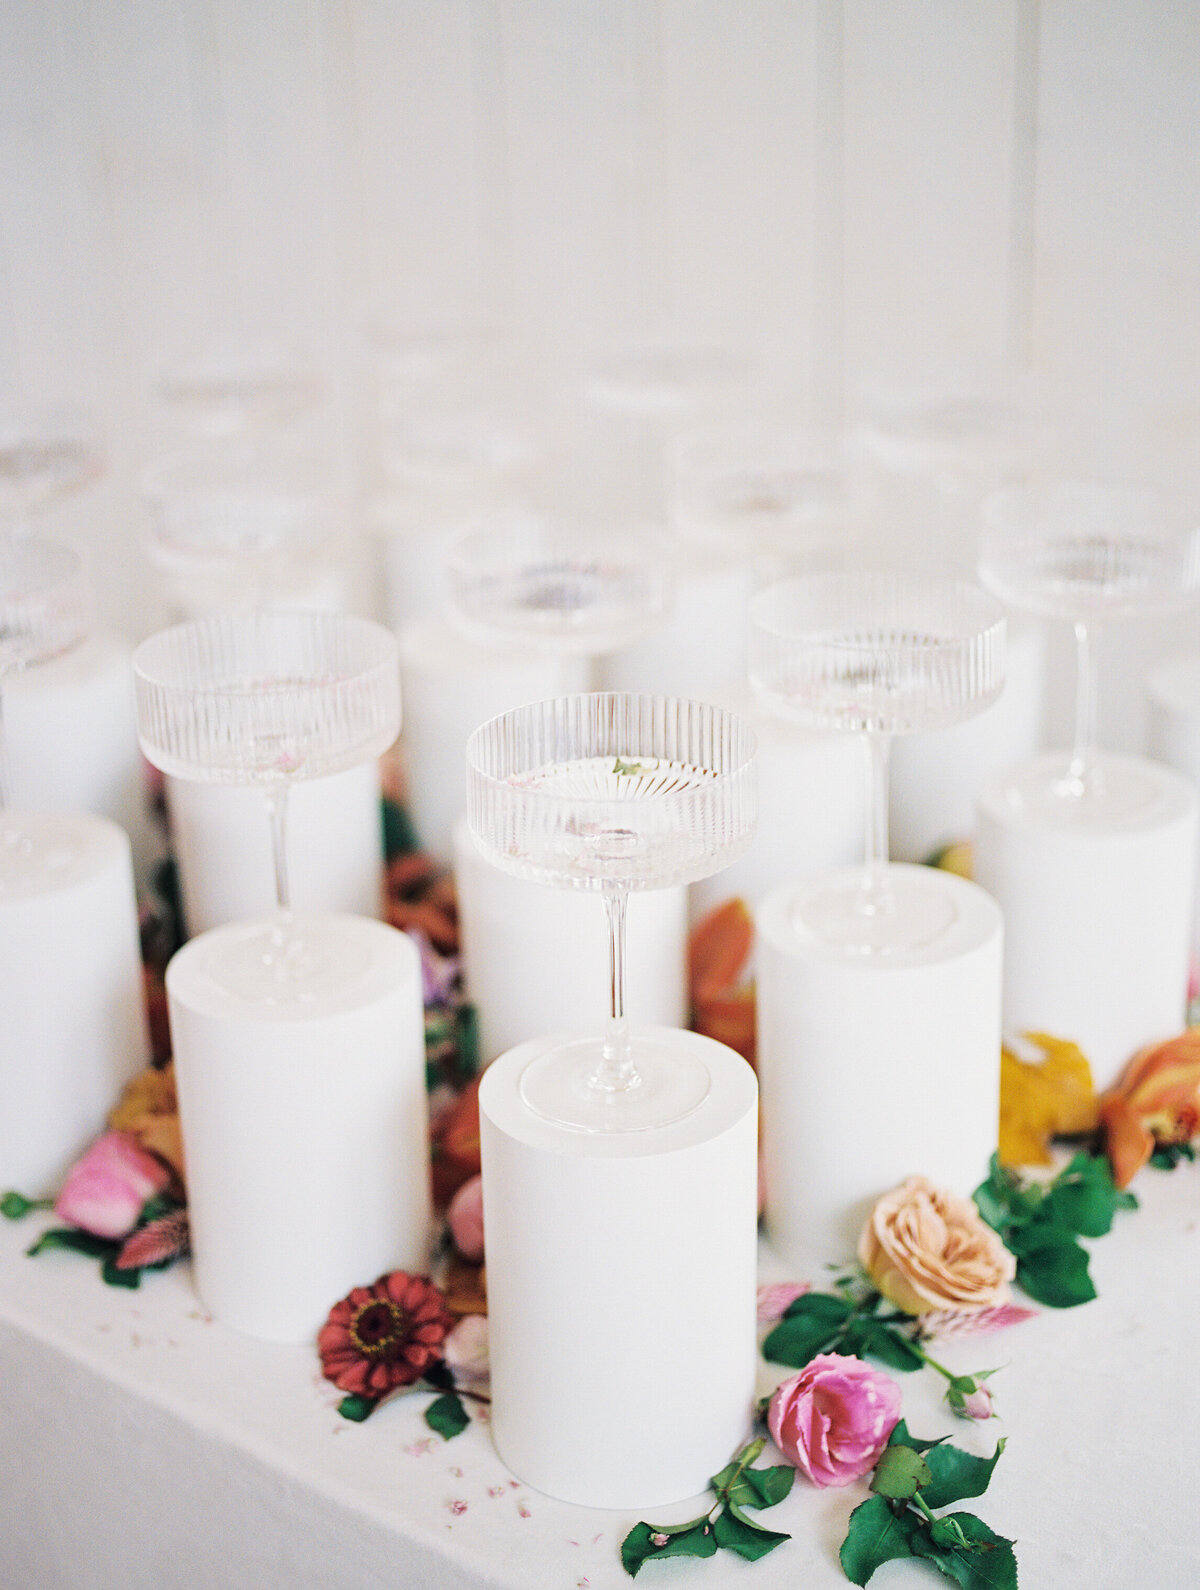 Display of champagne flutes for guests on white pedestals